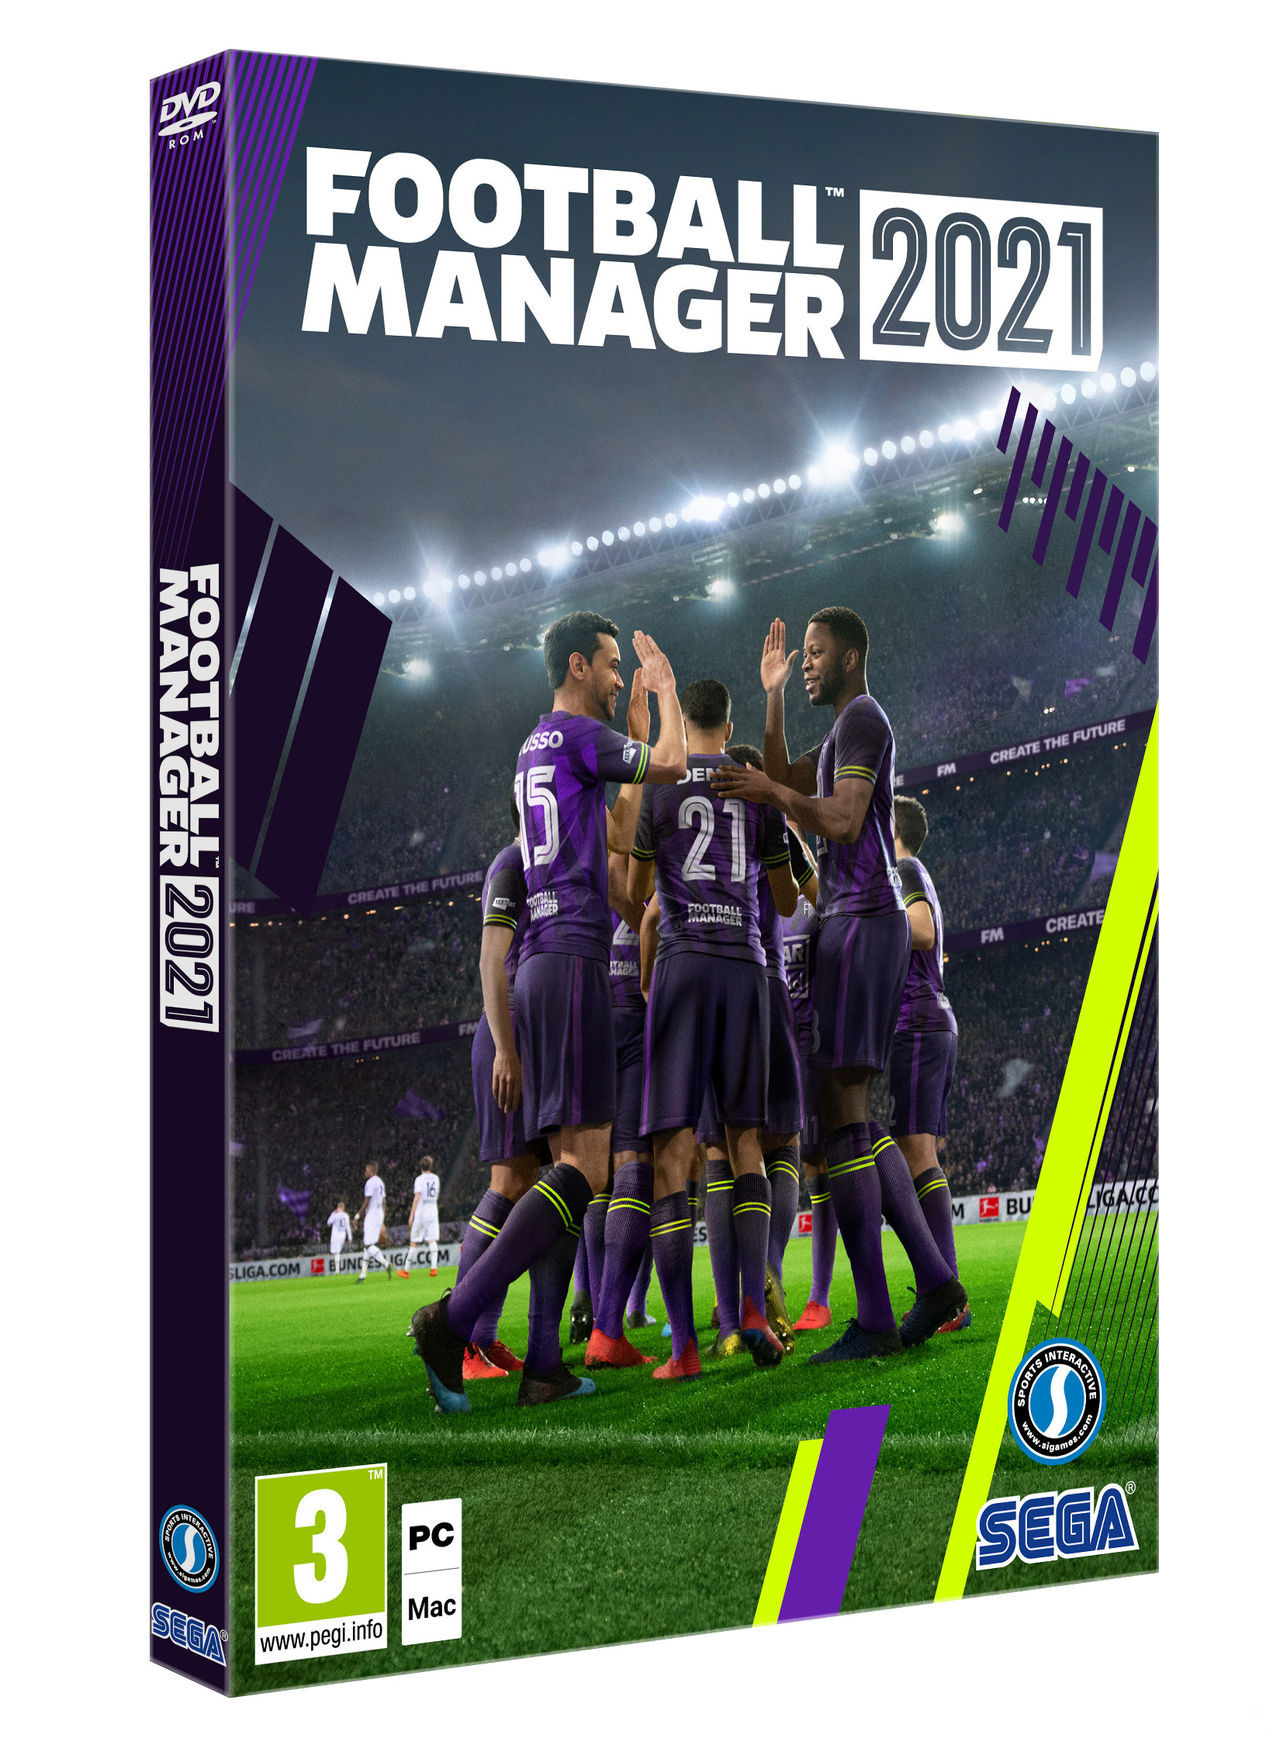 football manager 2021 xbox game pass